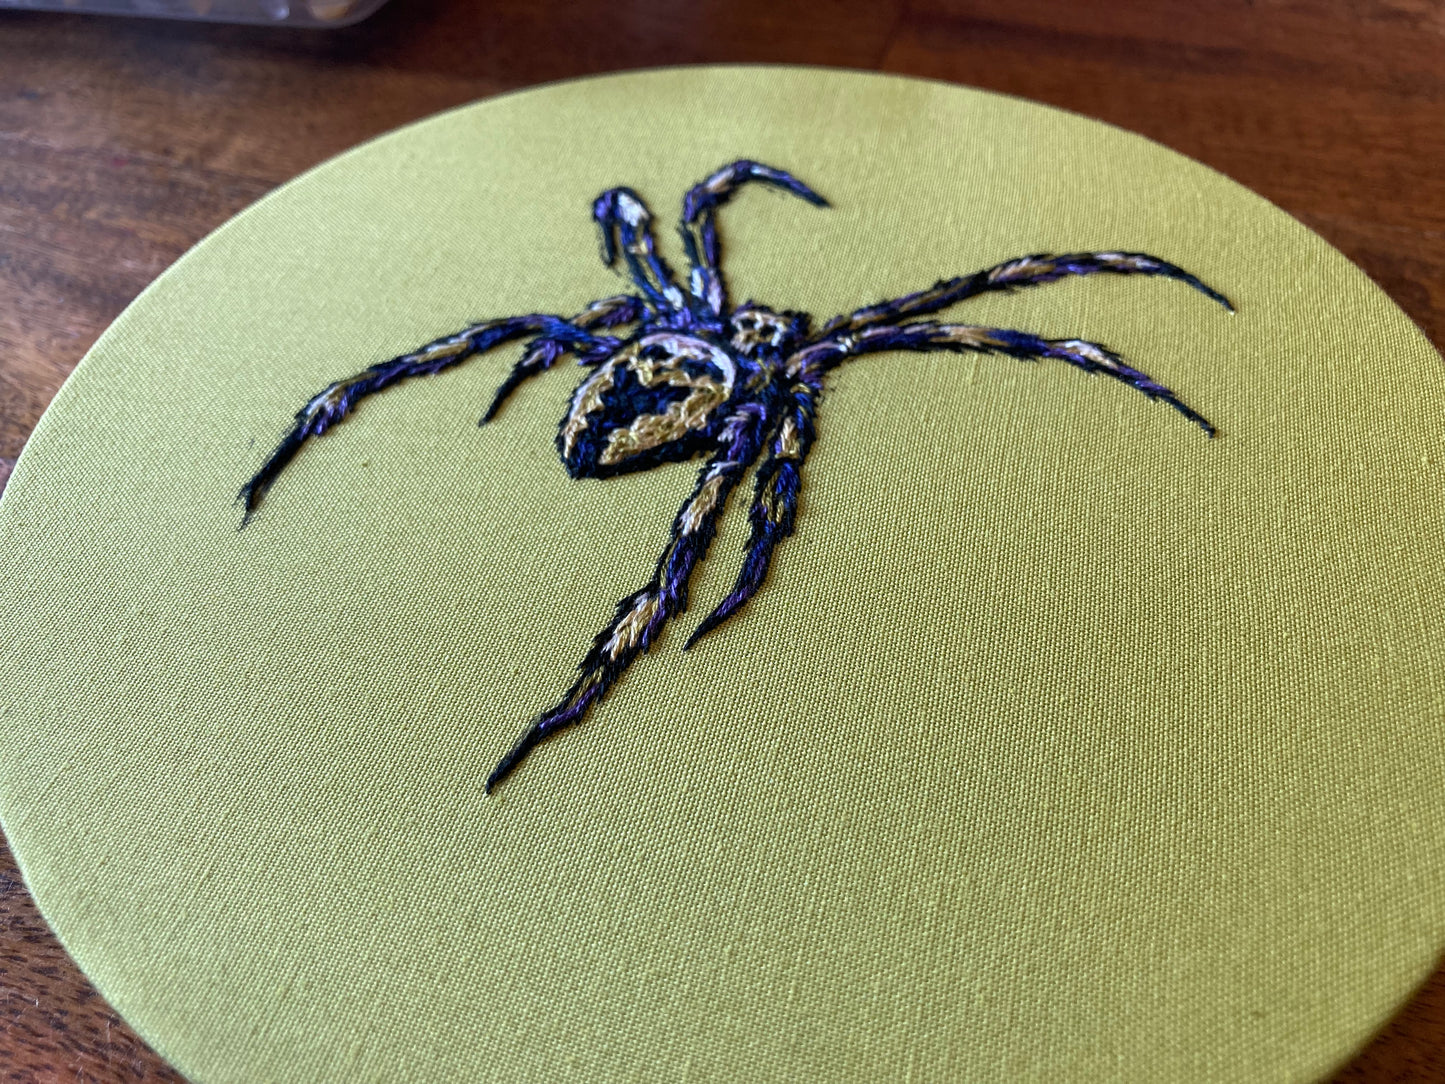 Creepy Skully Spider Printed Hand Embroidery - 7"